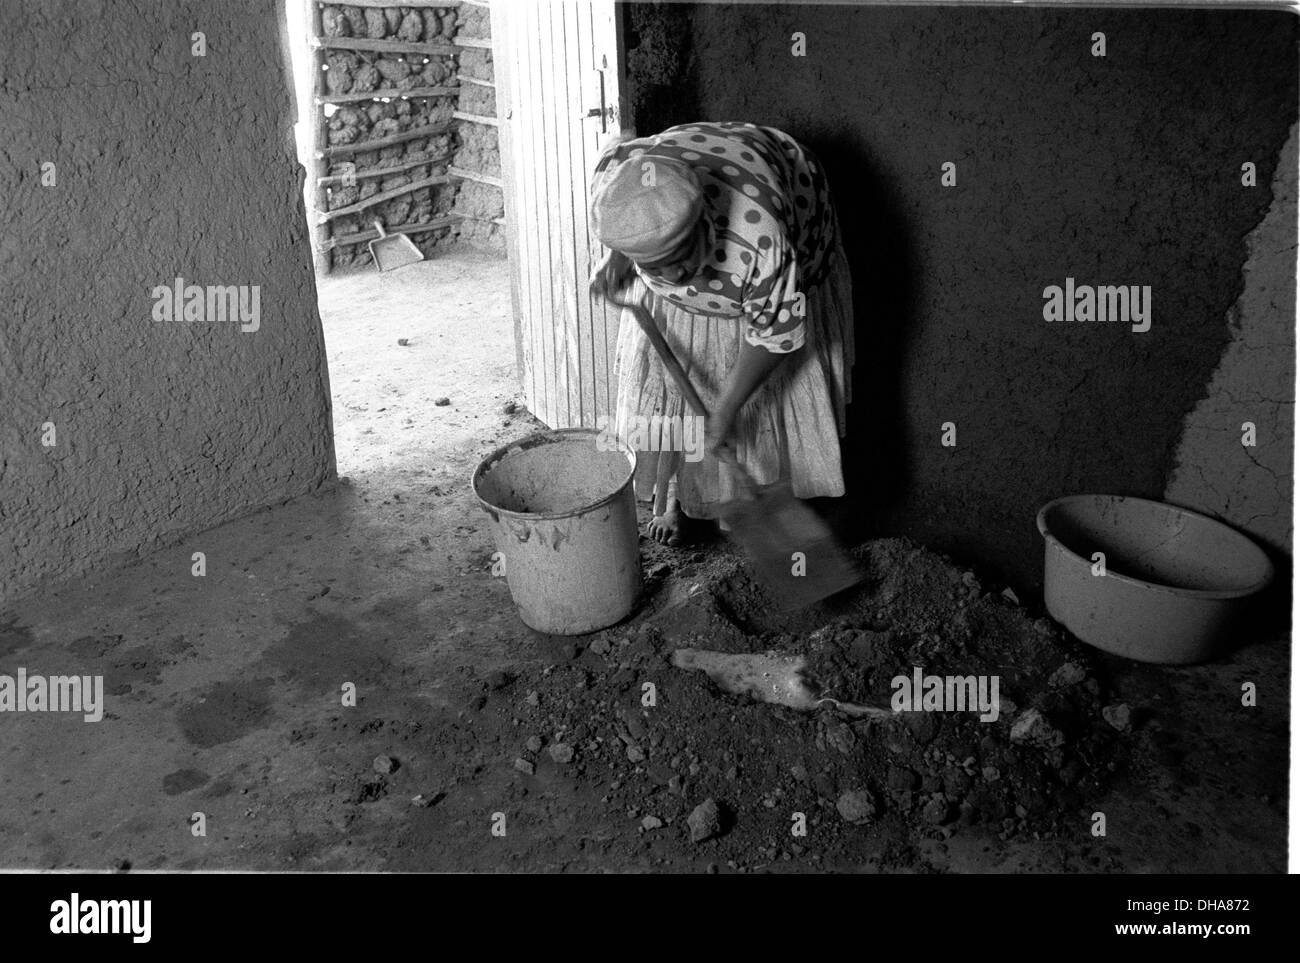 ipjr09090230Poverty and dignity. June 2004. Ms Mzila adds water to the dry clay to prepare a plaster to apply to the walls.. Ms Stock Photo